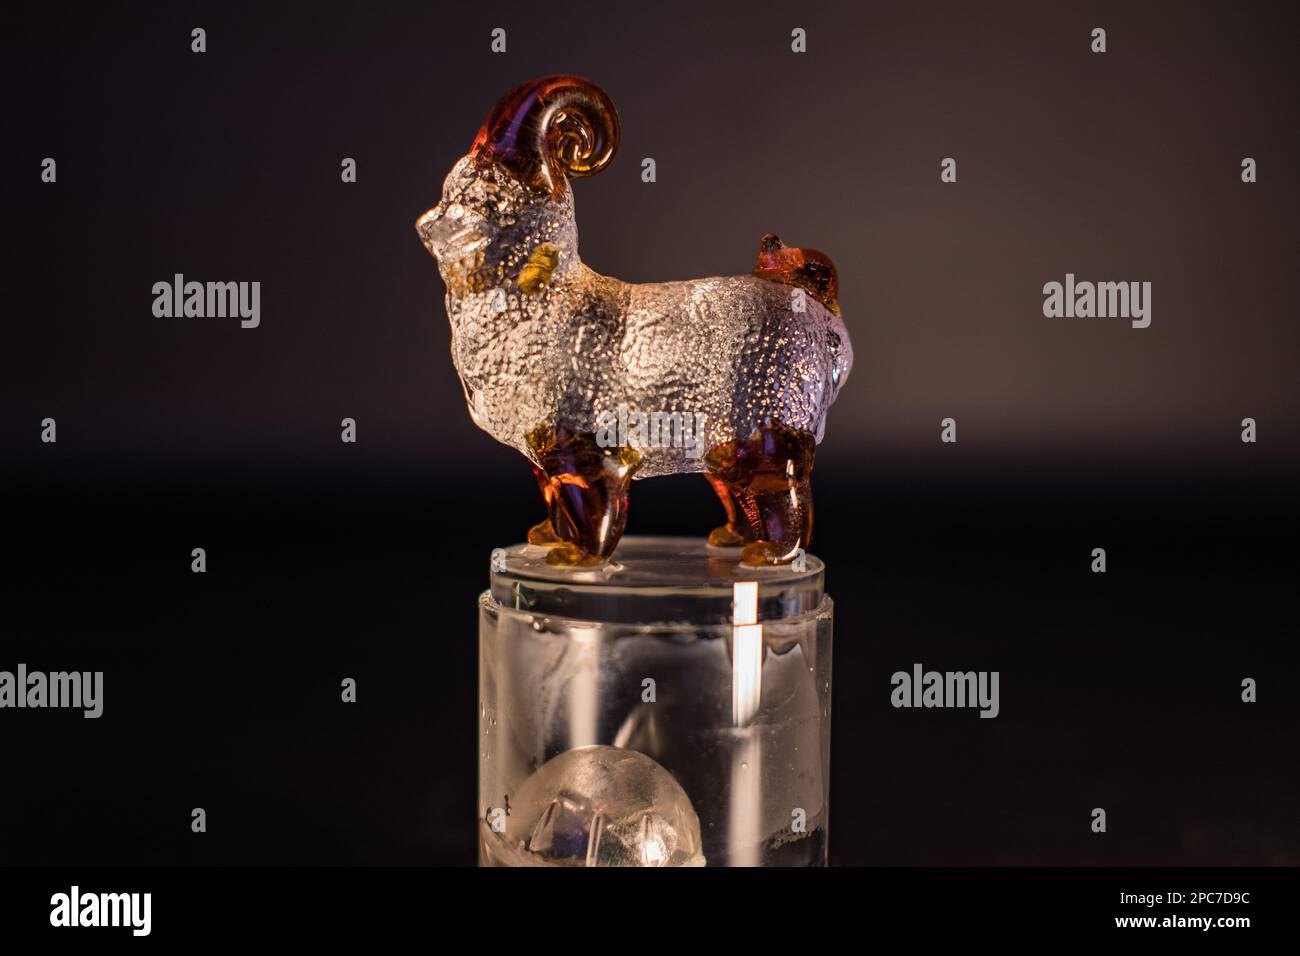 Souvenir in the shape of a ram made of glass on a black background Stock Photo